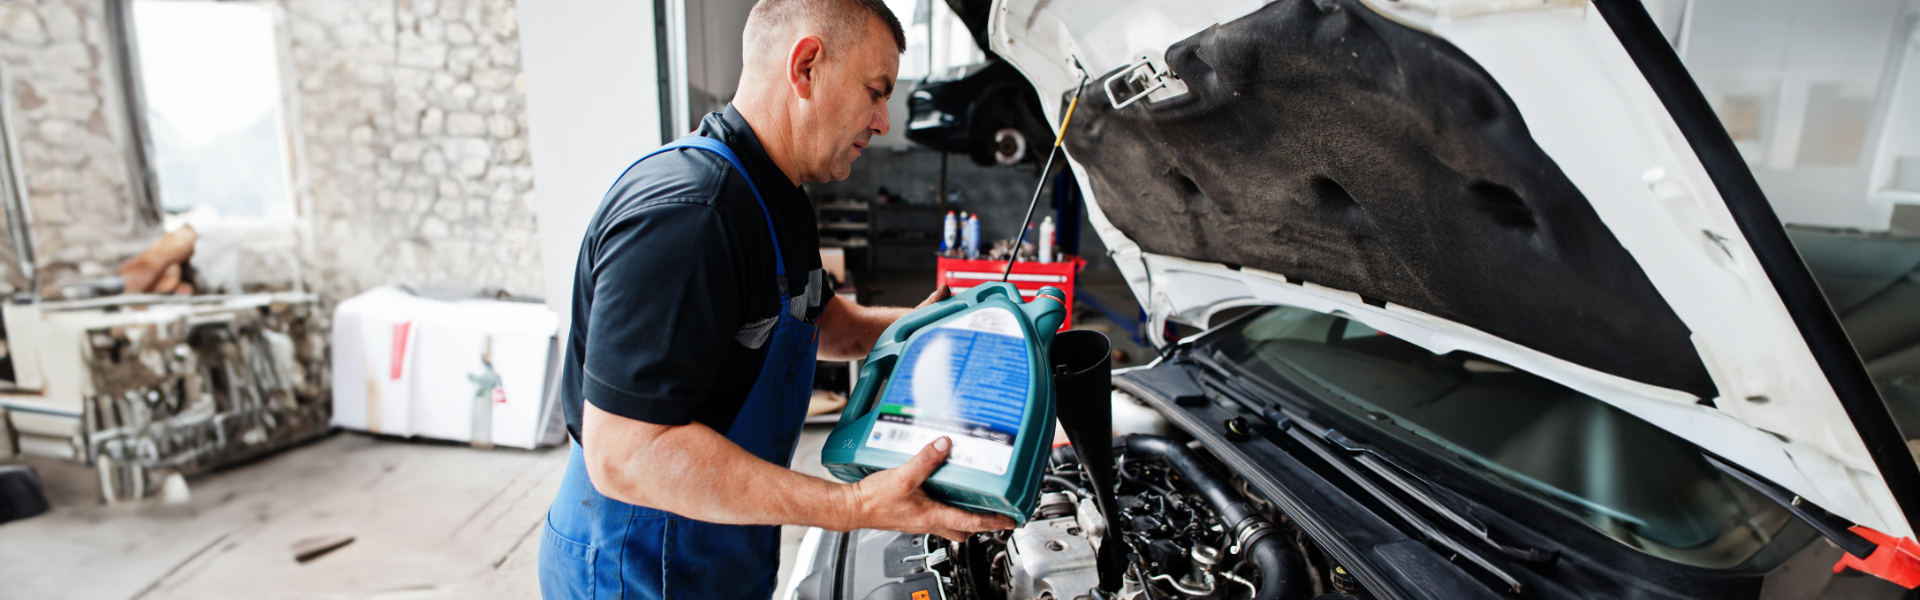 What are the most common engine oil problems and how can they be solved?